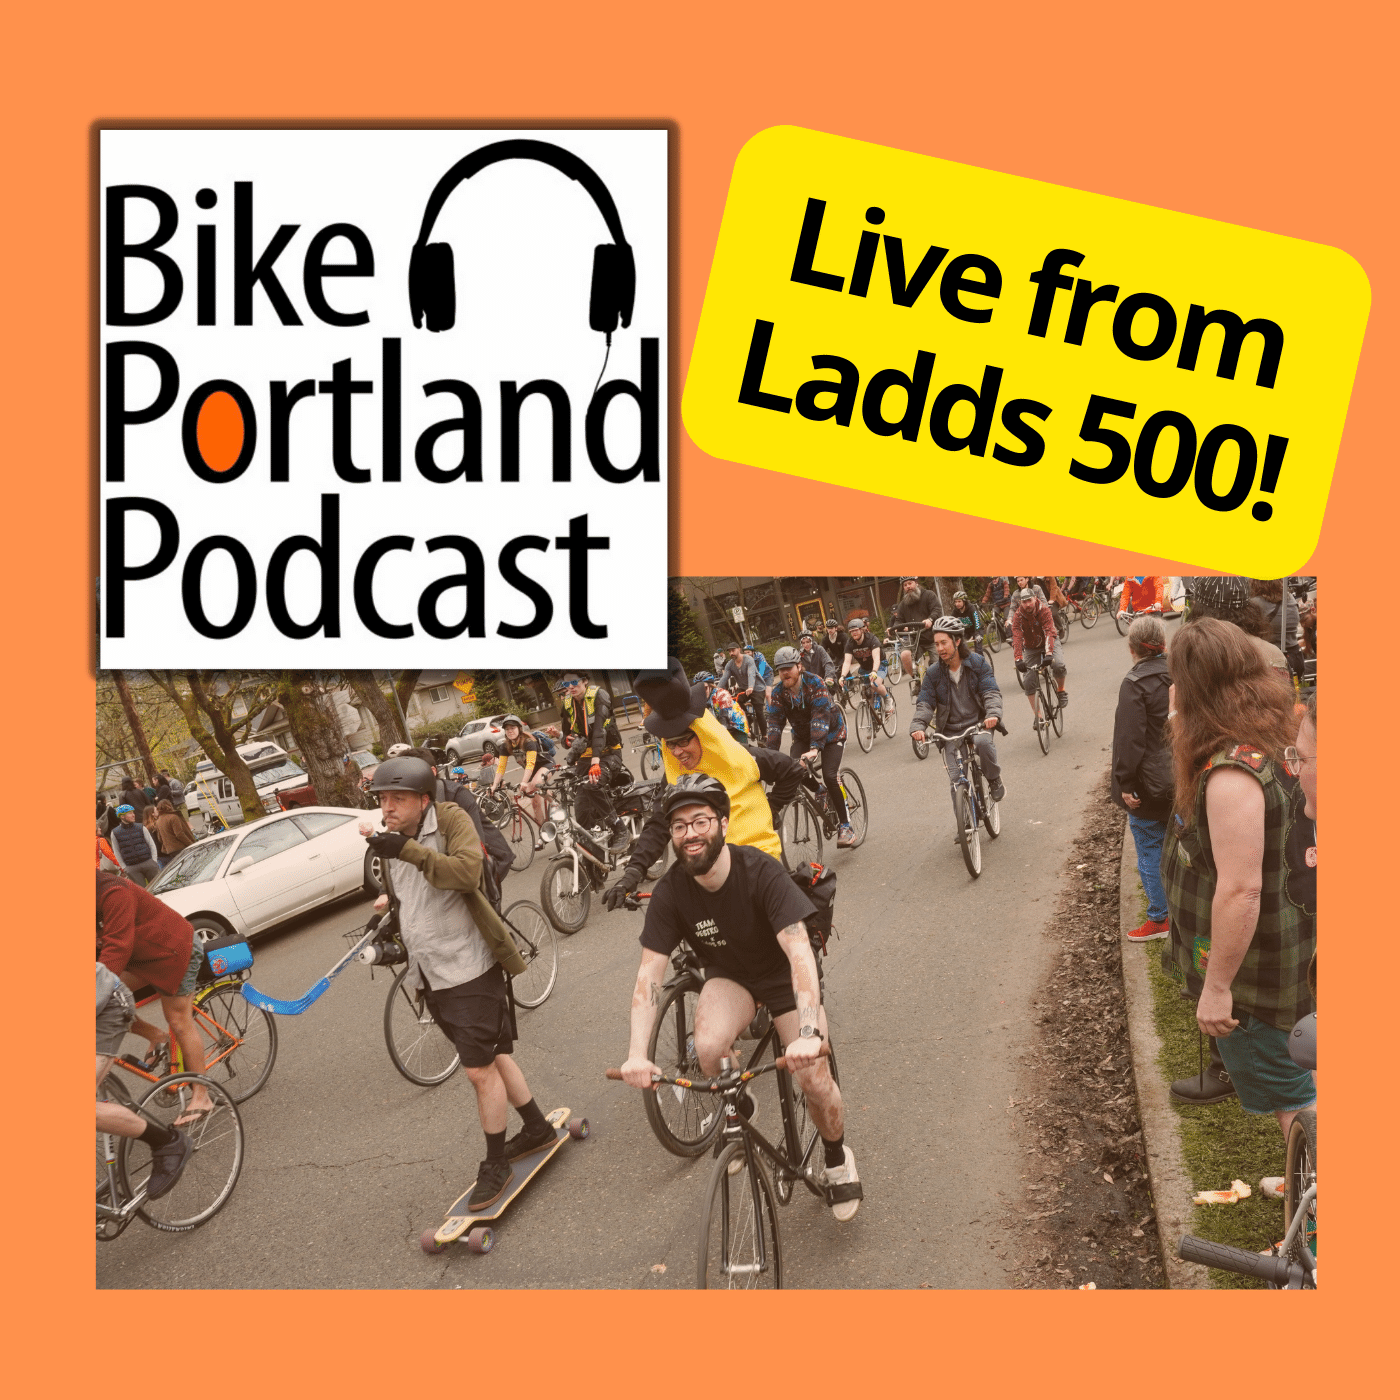 Podcast Live from the Ladds 500!